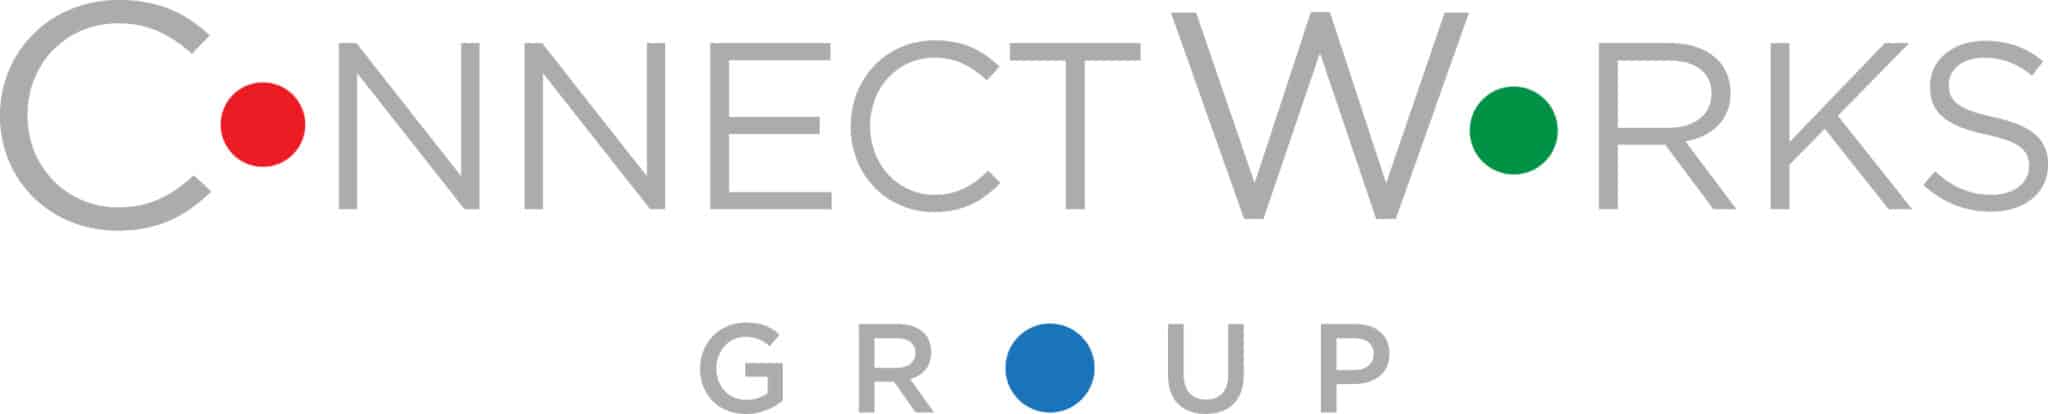 ConnectWorks Group logo